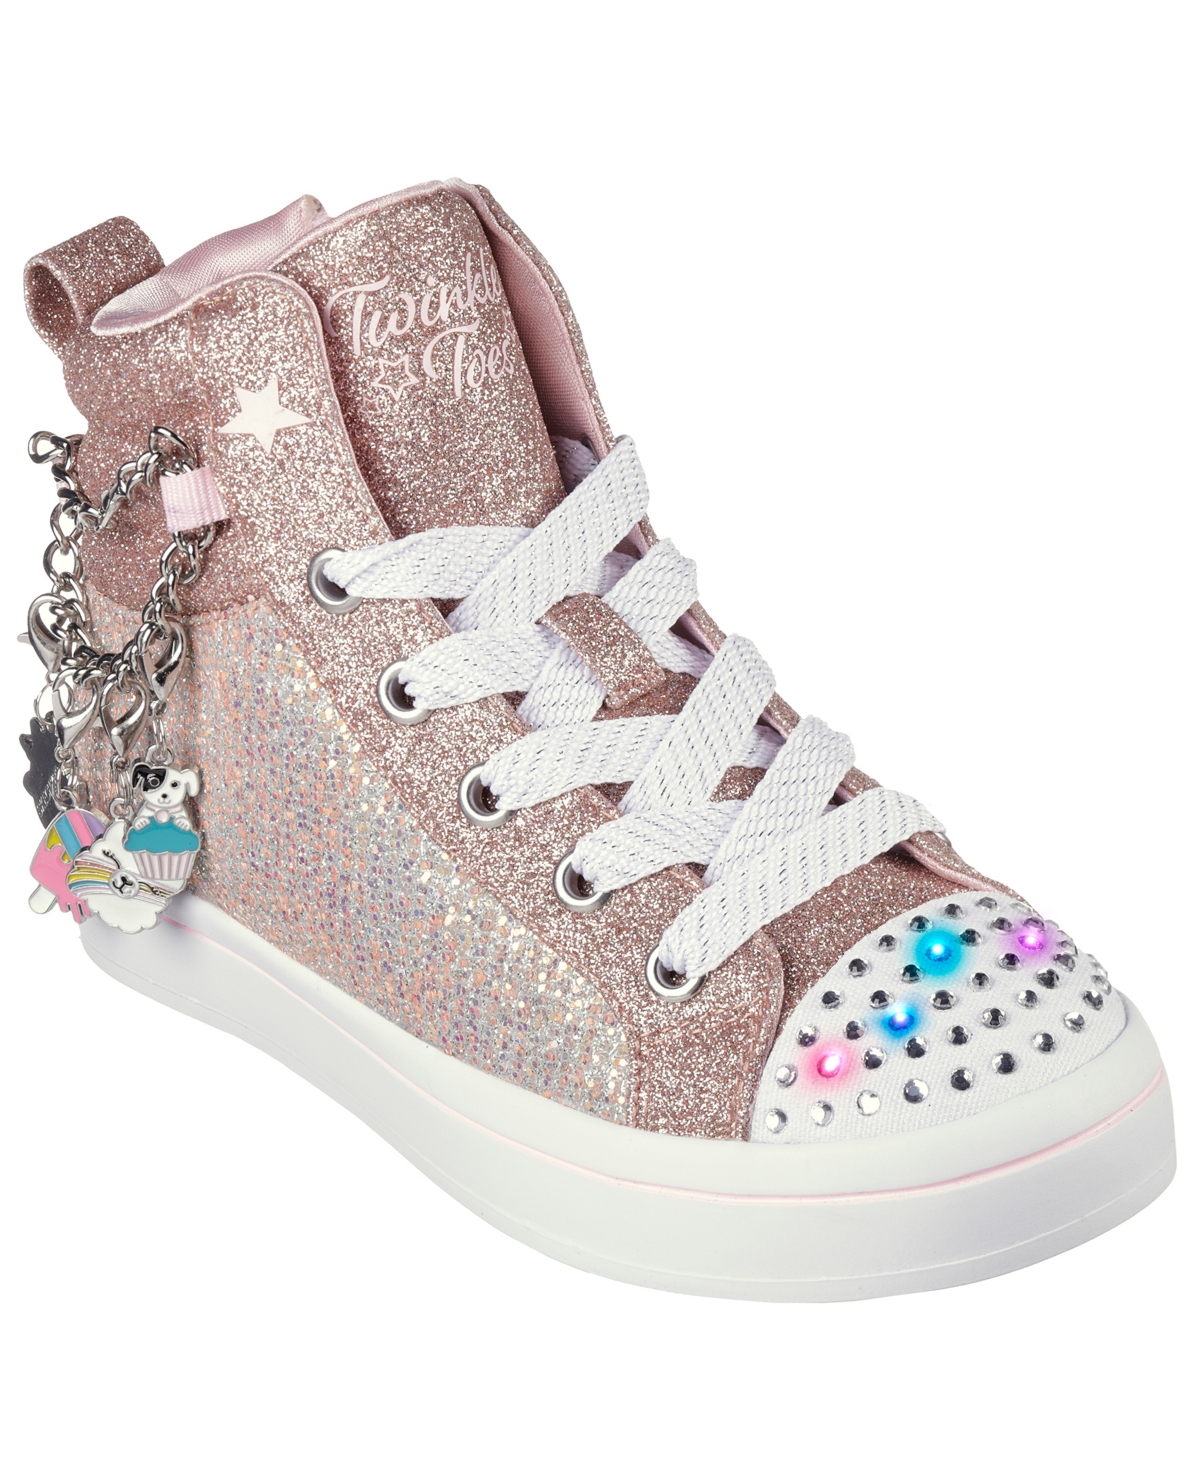 Skechers Little Girls Twinkle Toes - Twi-lites 2.0 - Twinkle Charms Light-up High-top Casual Sneakers From Fi In Rose Gold